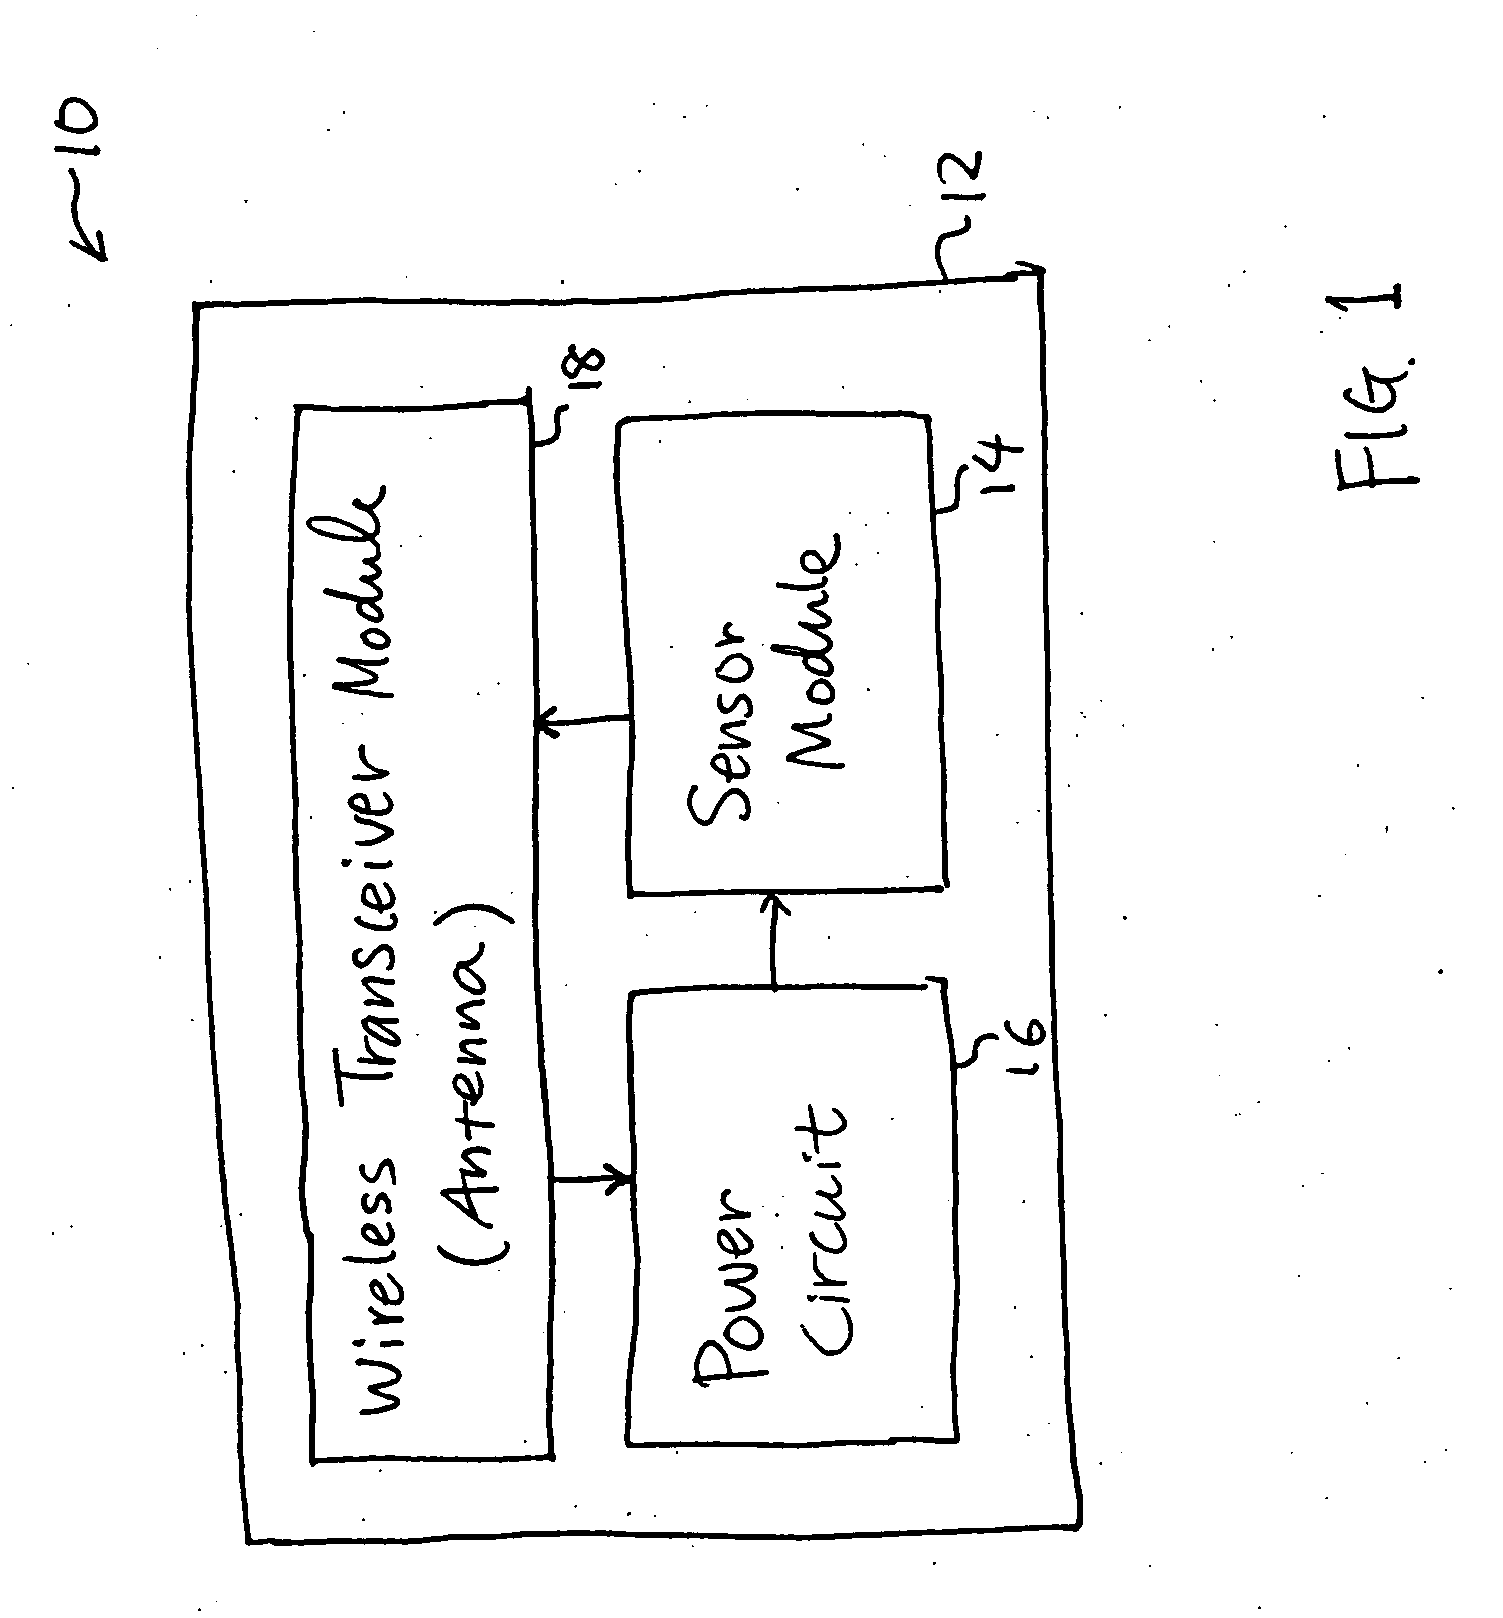 Smart card for passport, electronic passport, and method, system, and apparatus for authenticating person holding smart card or electronic passport